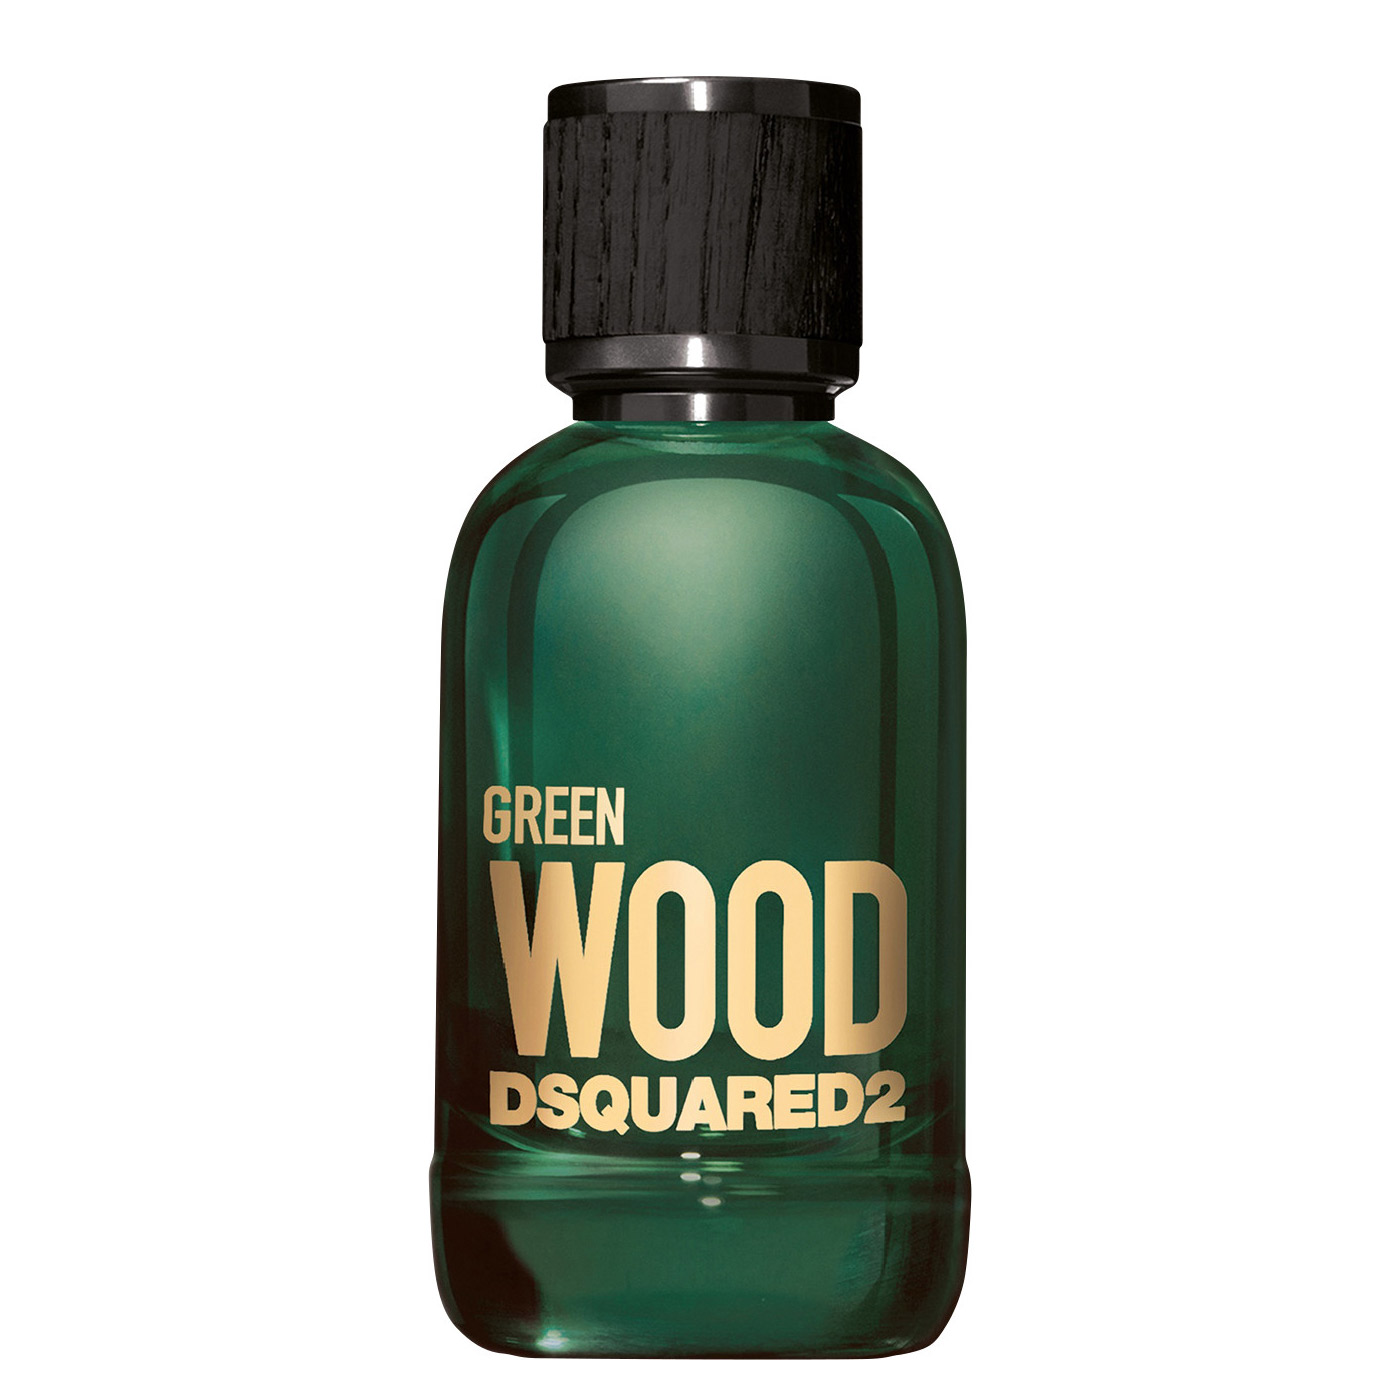 Green Wood Dsquared2 Image